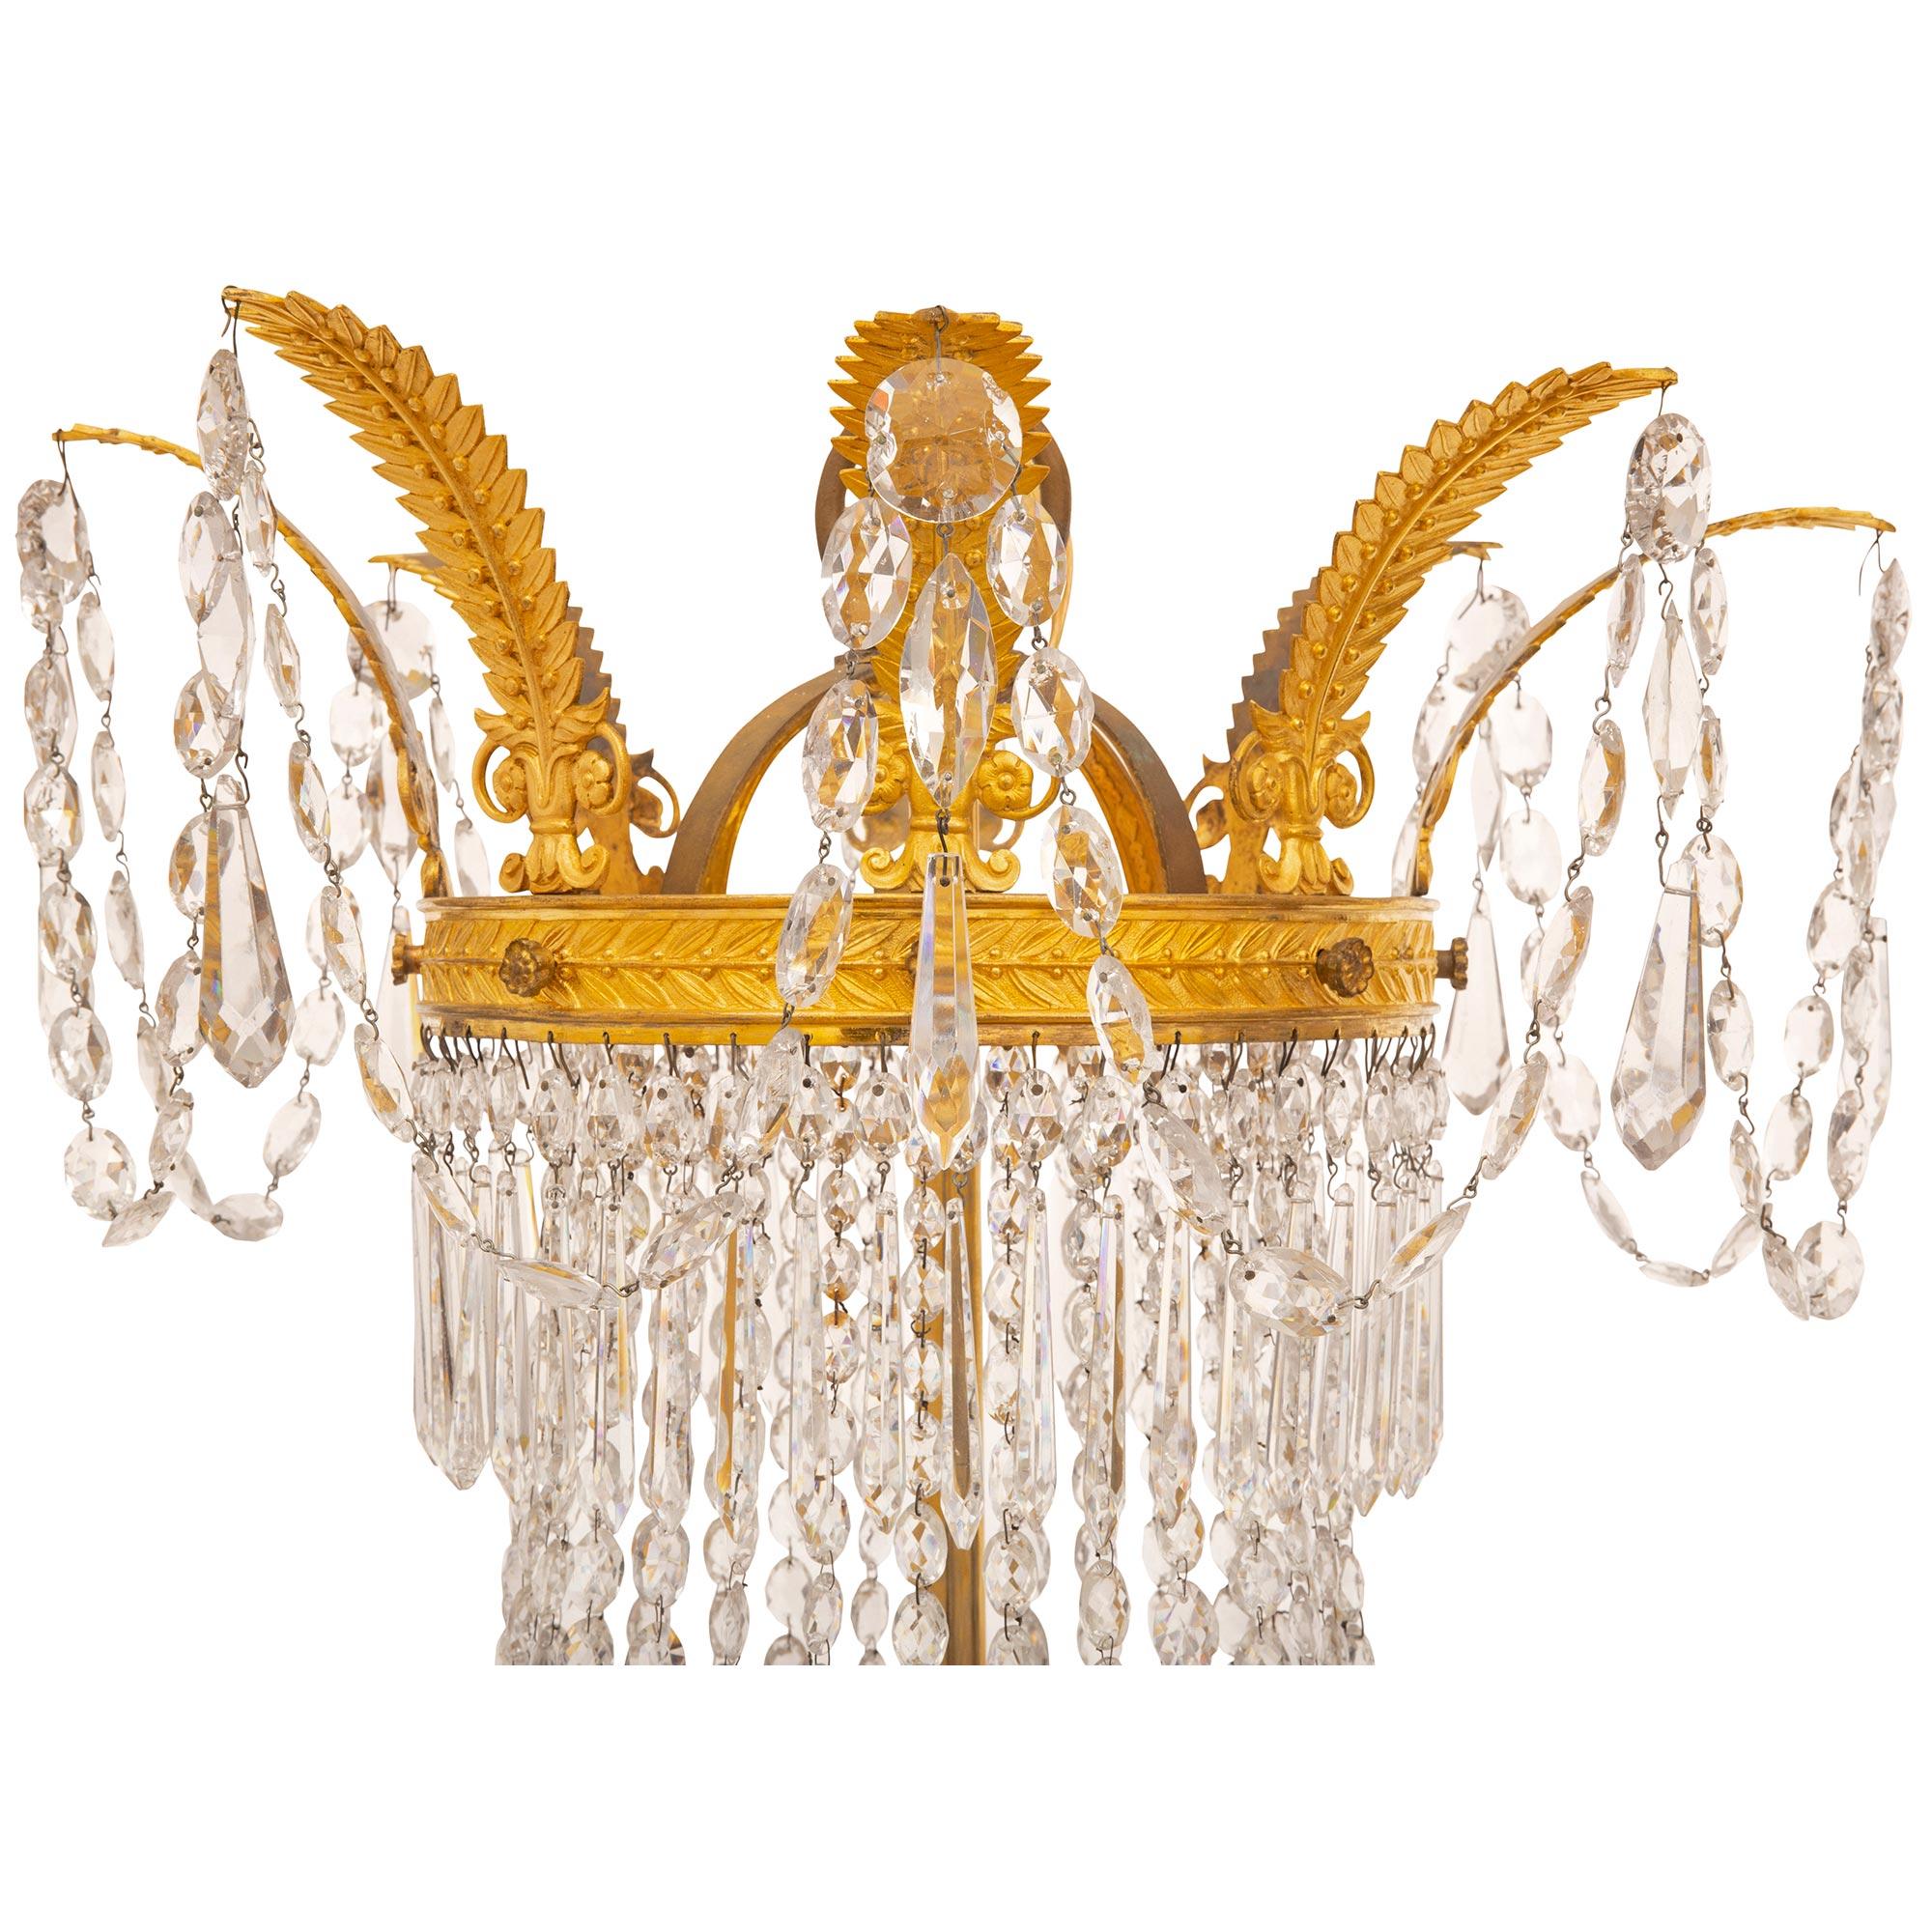 French 19th Century First Empire Period Ormolu and Crystal Chandelier For Sale 1